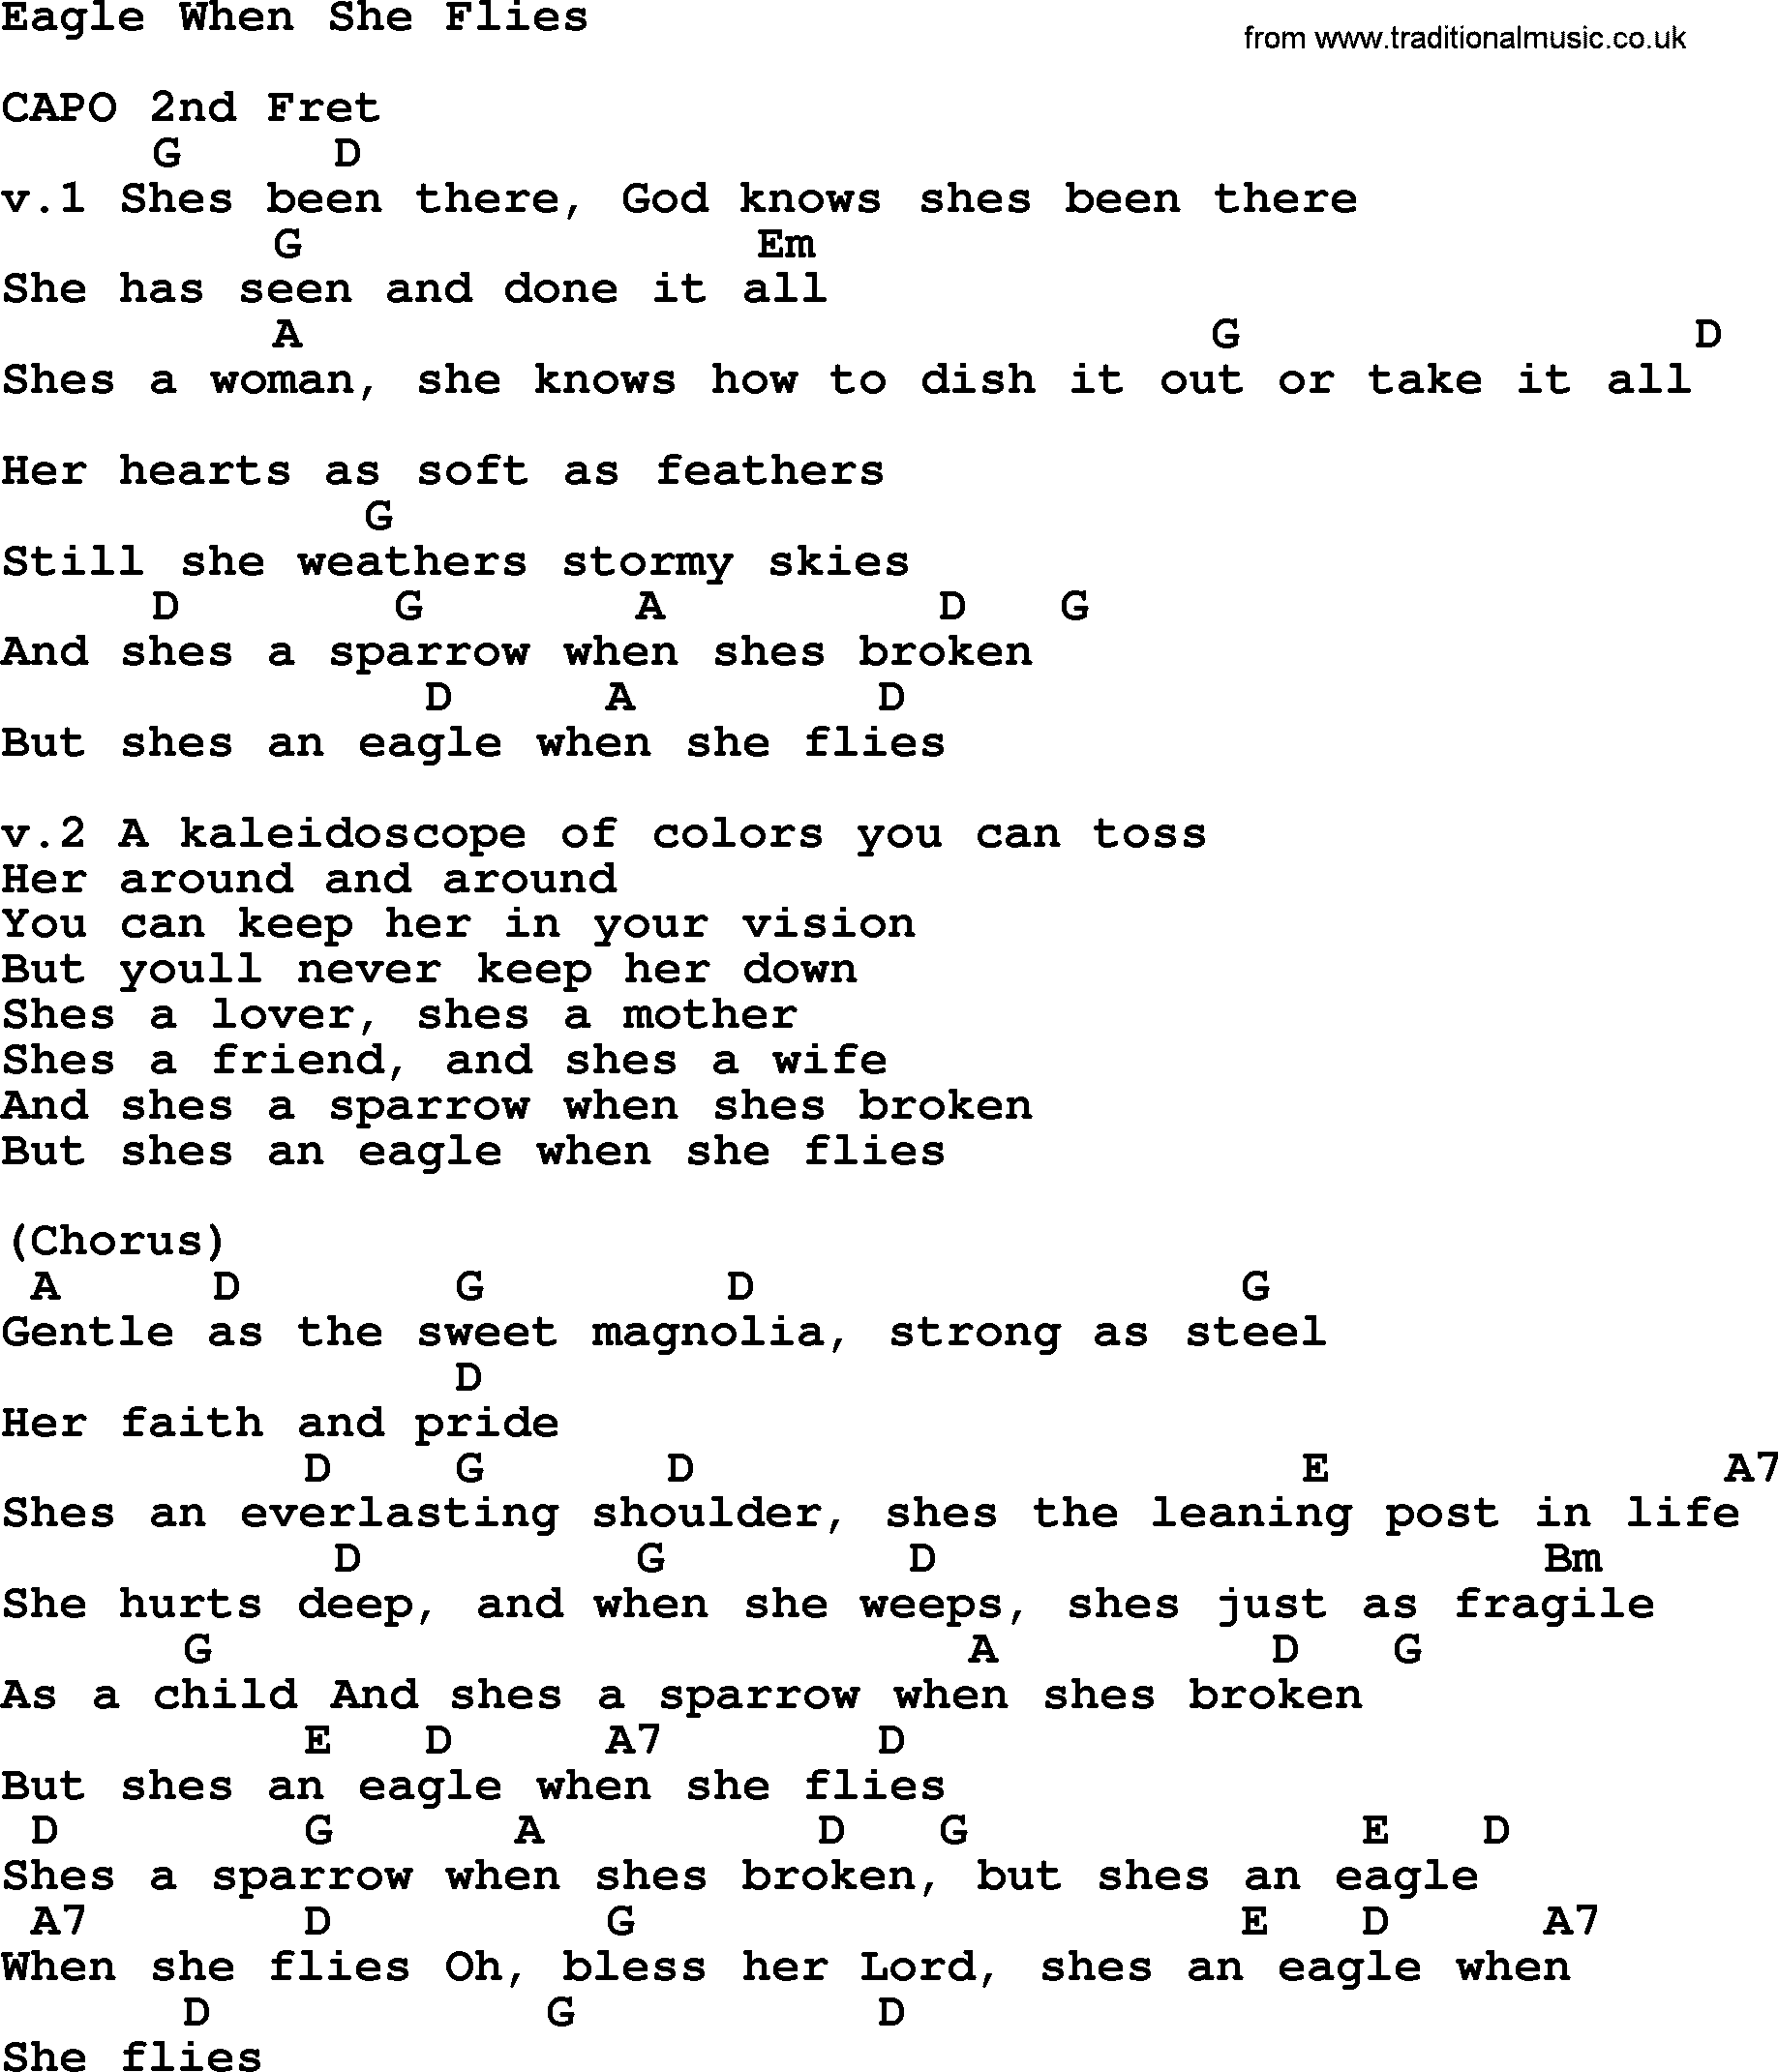 Dolly Parton song Eagle When She Flies, lyrics and chords